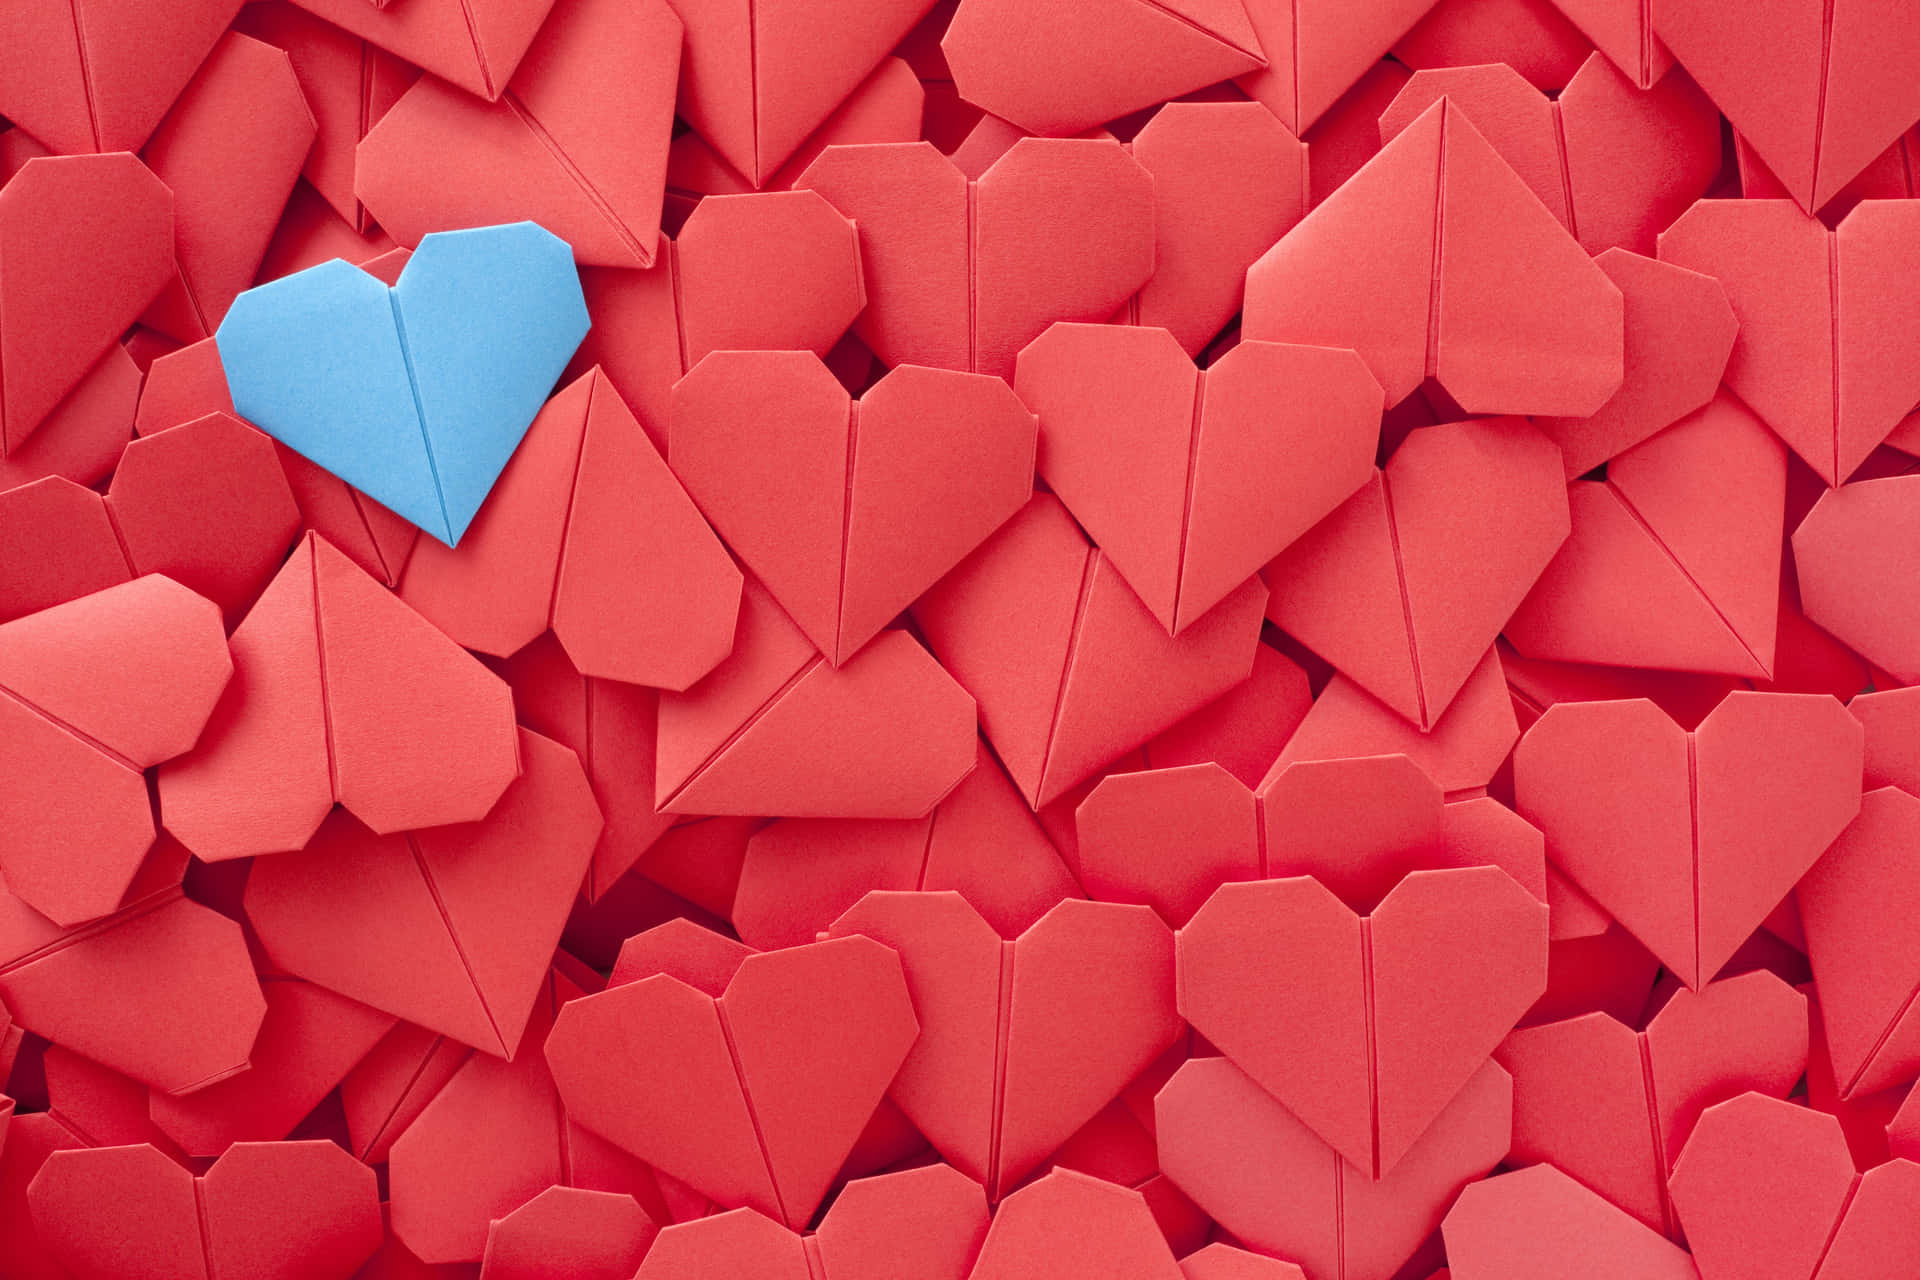 Blue Red Heart Origami Valentine's Day Pictures 5000 x 3333 Picture